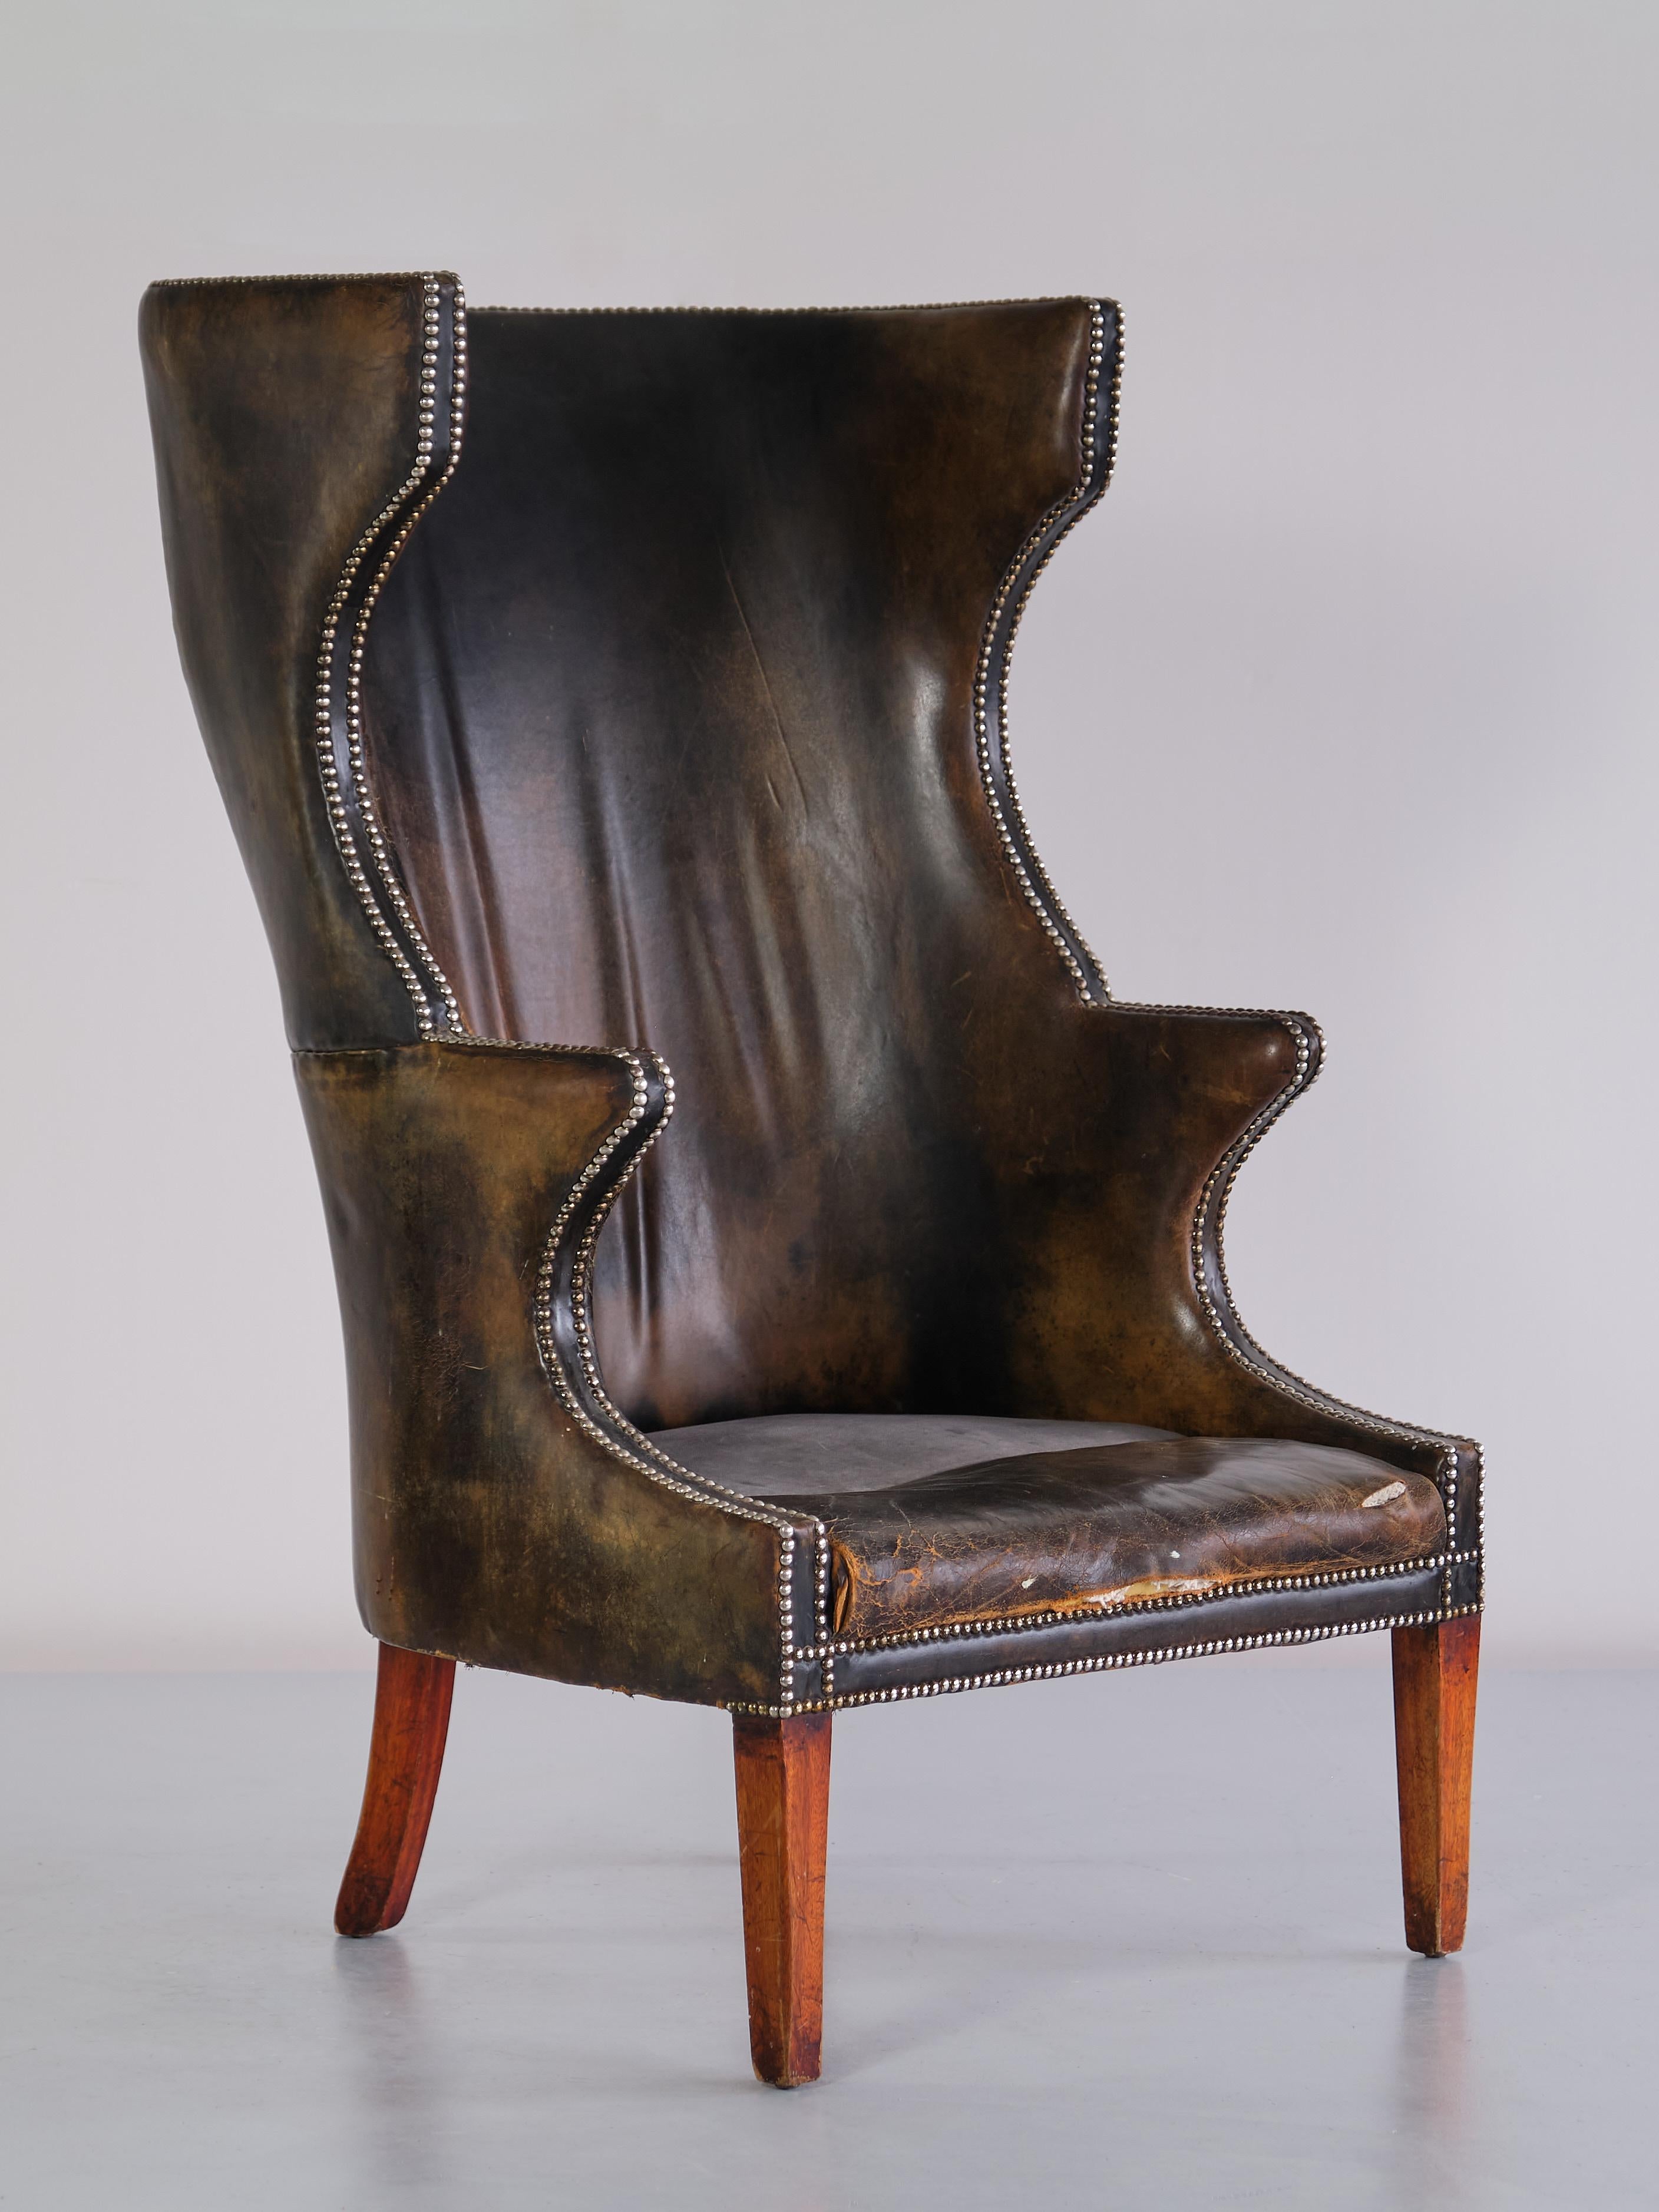 Scandinavian Modern Exceptional Danish Cabinetmaker Wingback Chair in Leather and Beech, 1930s